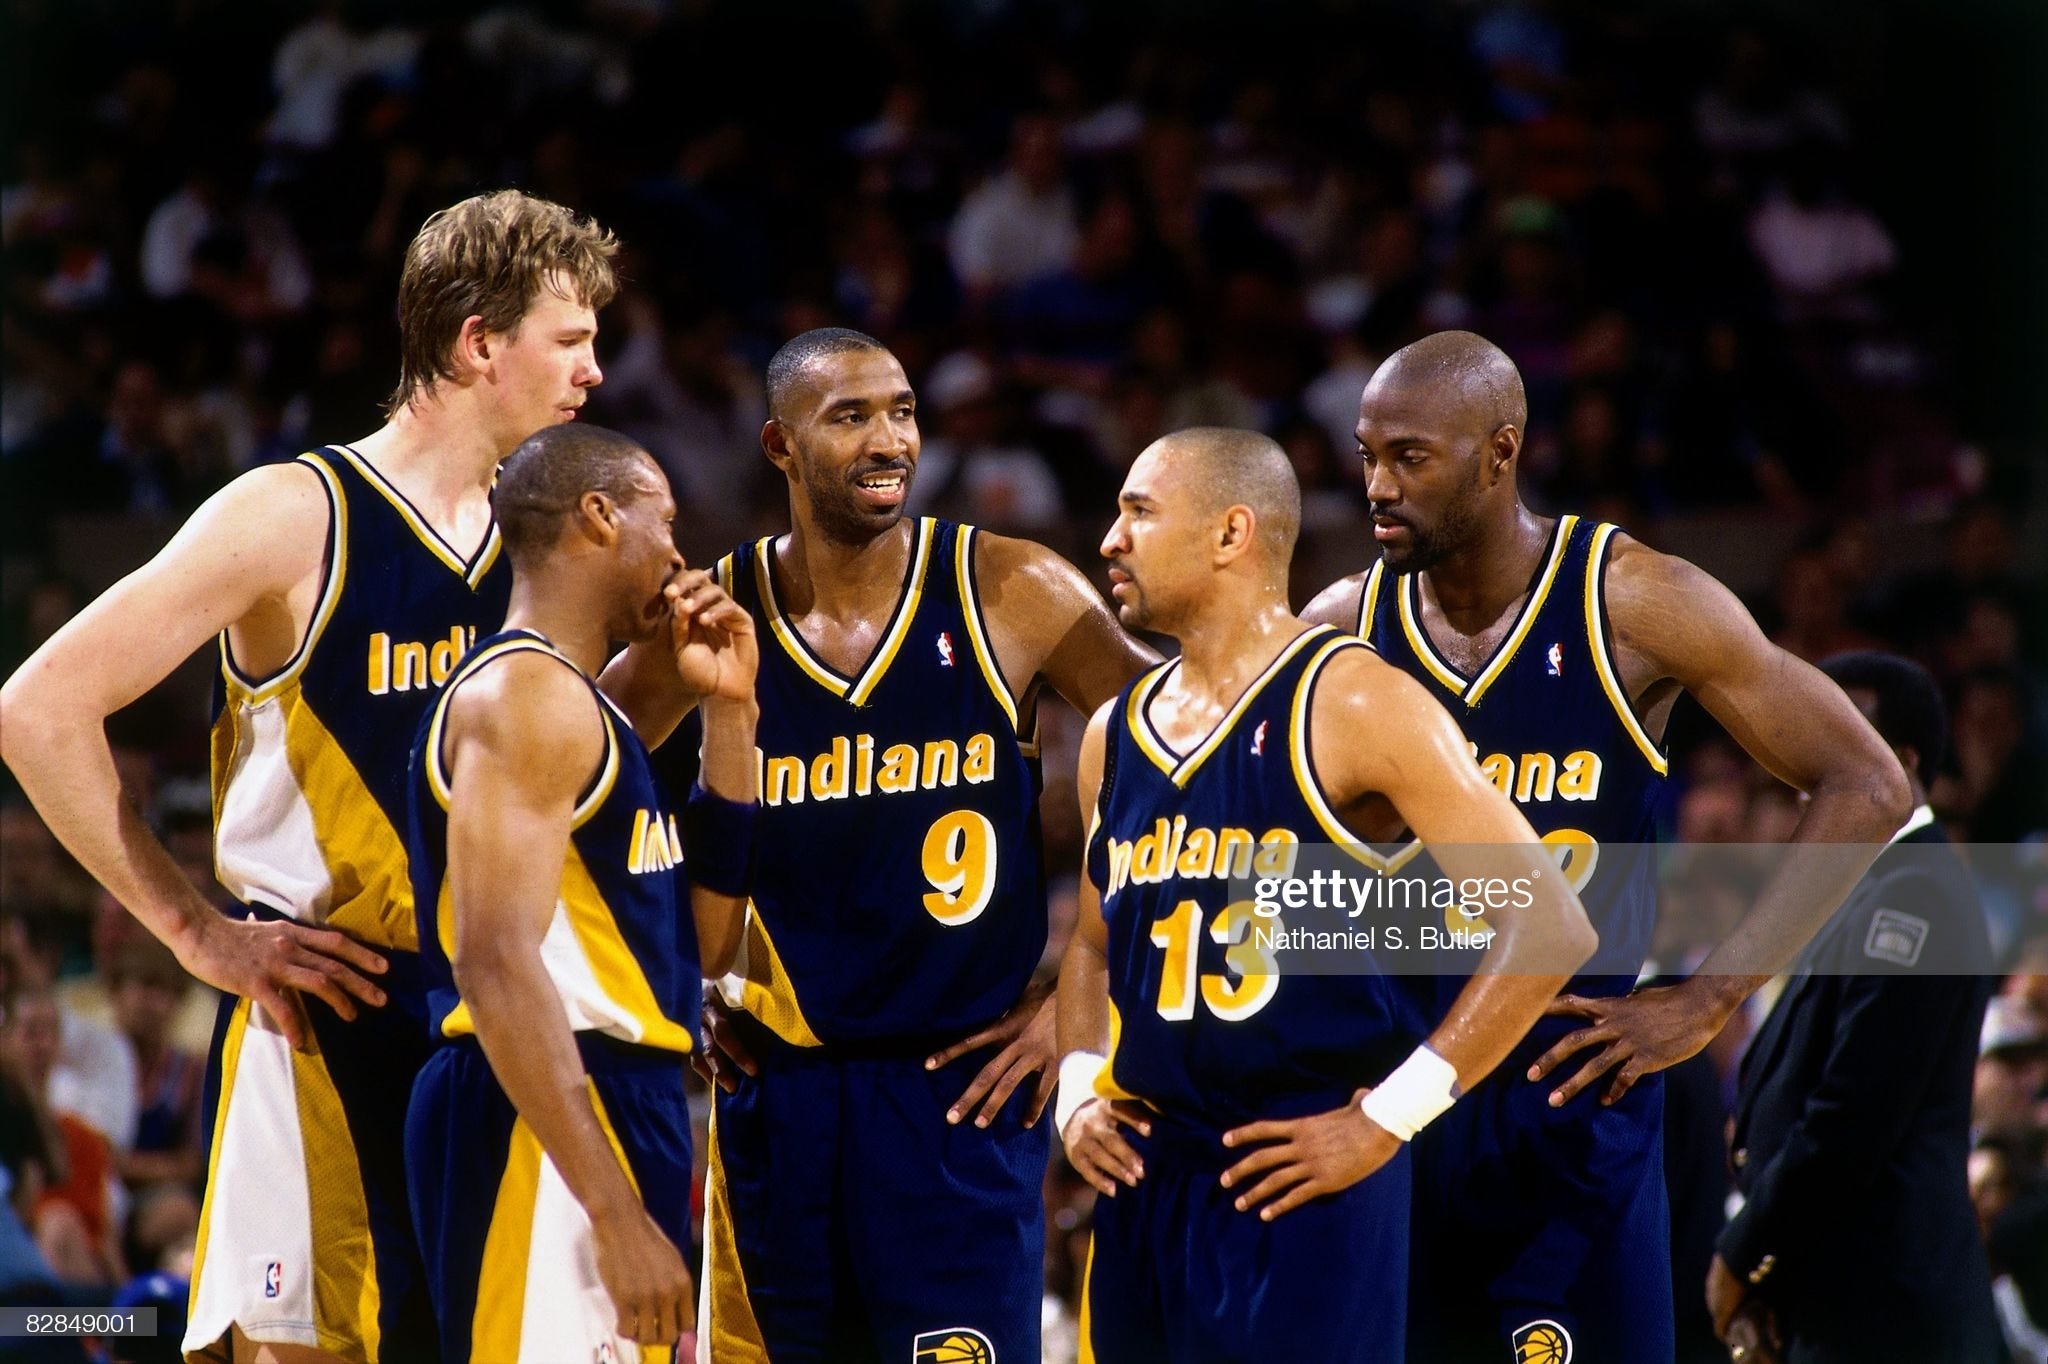 1998 or 2000? What is the Best Pacers Team in NBA Franchise History?